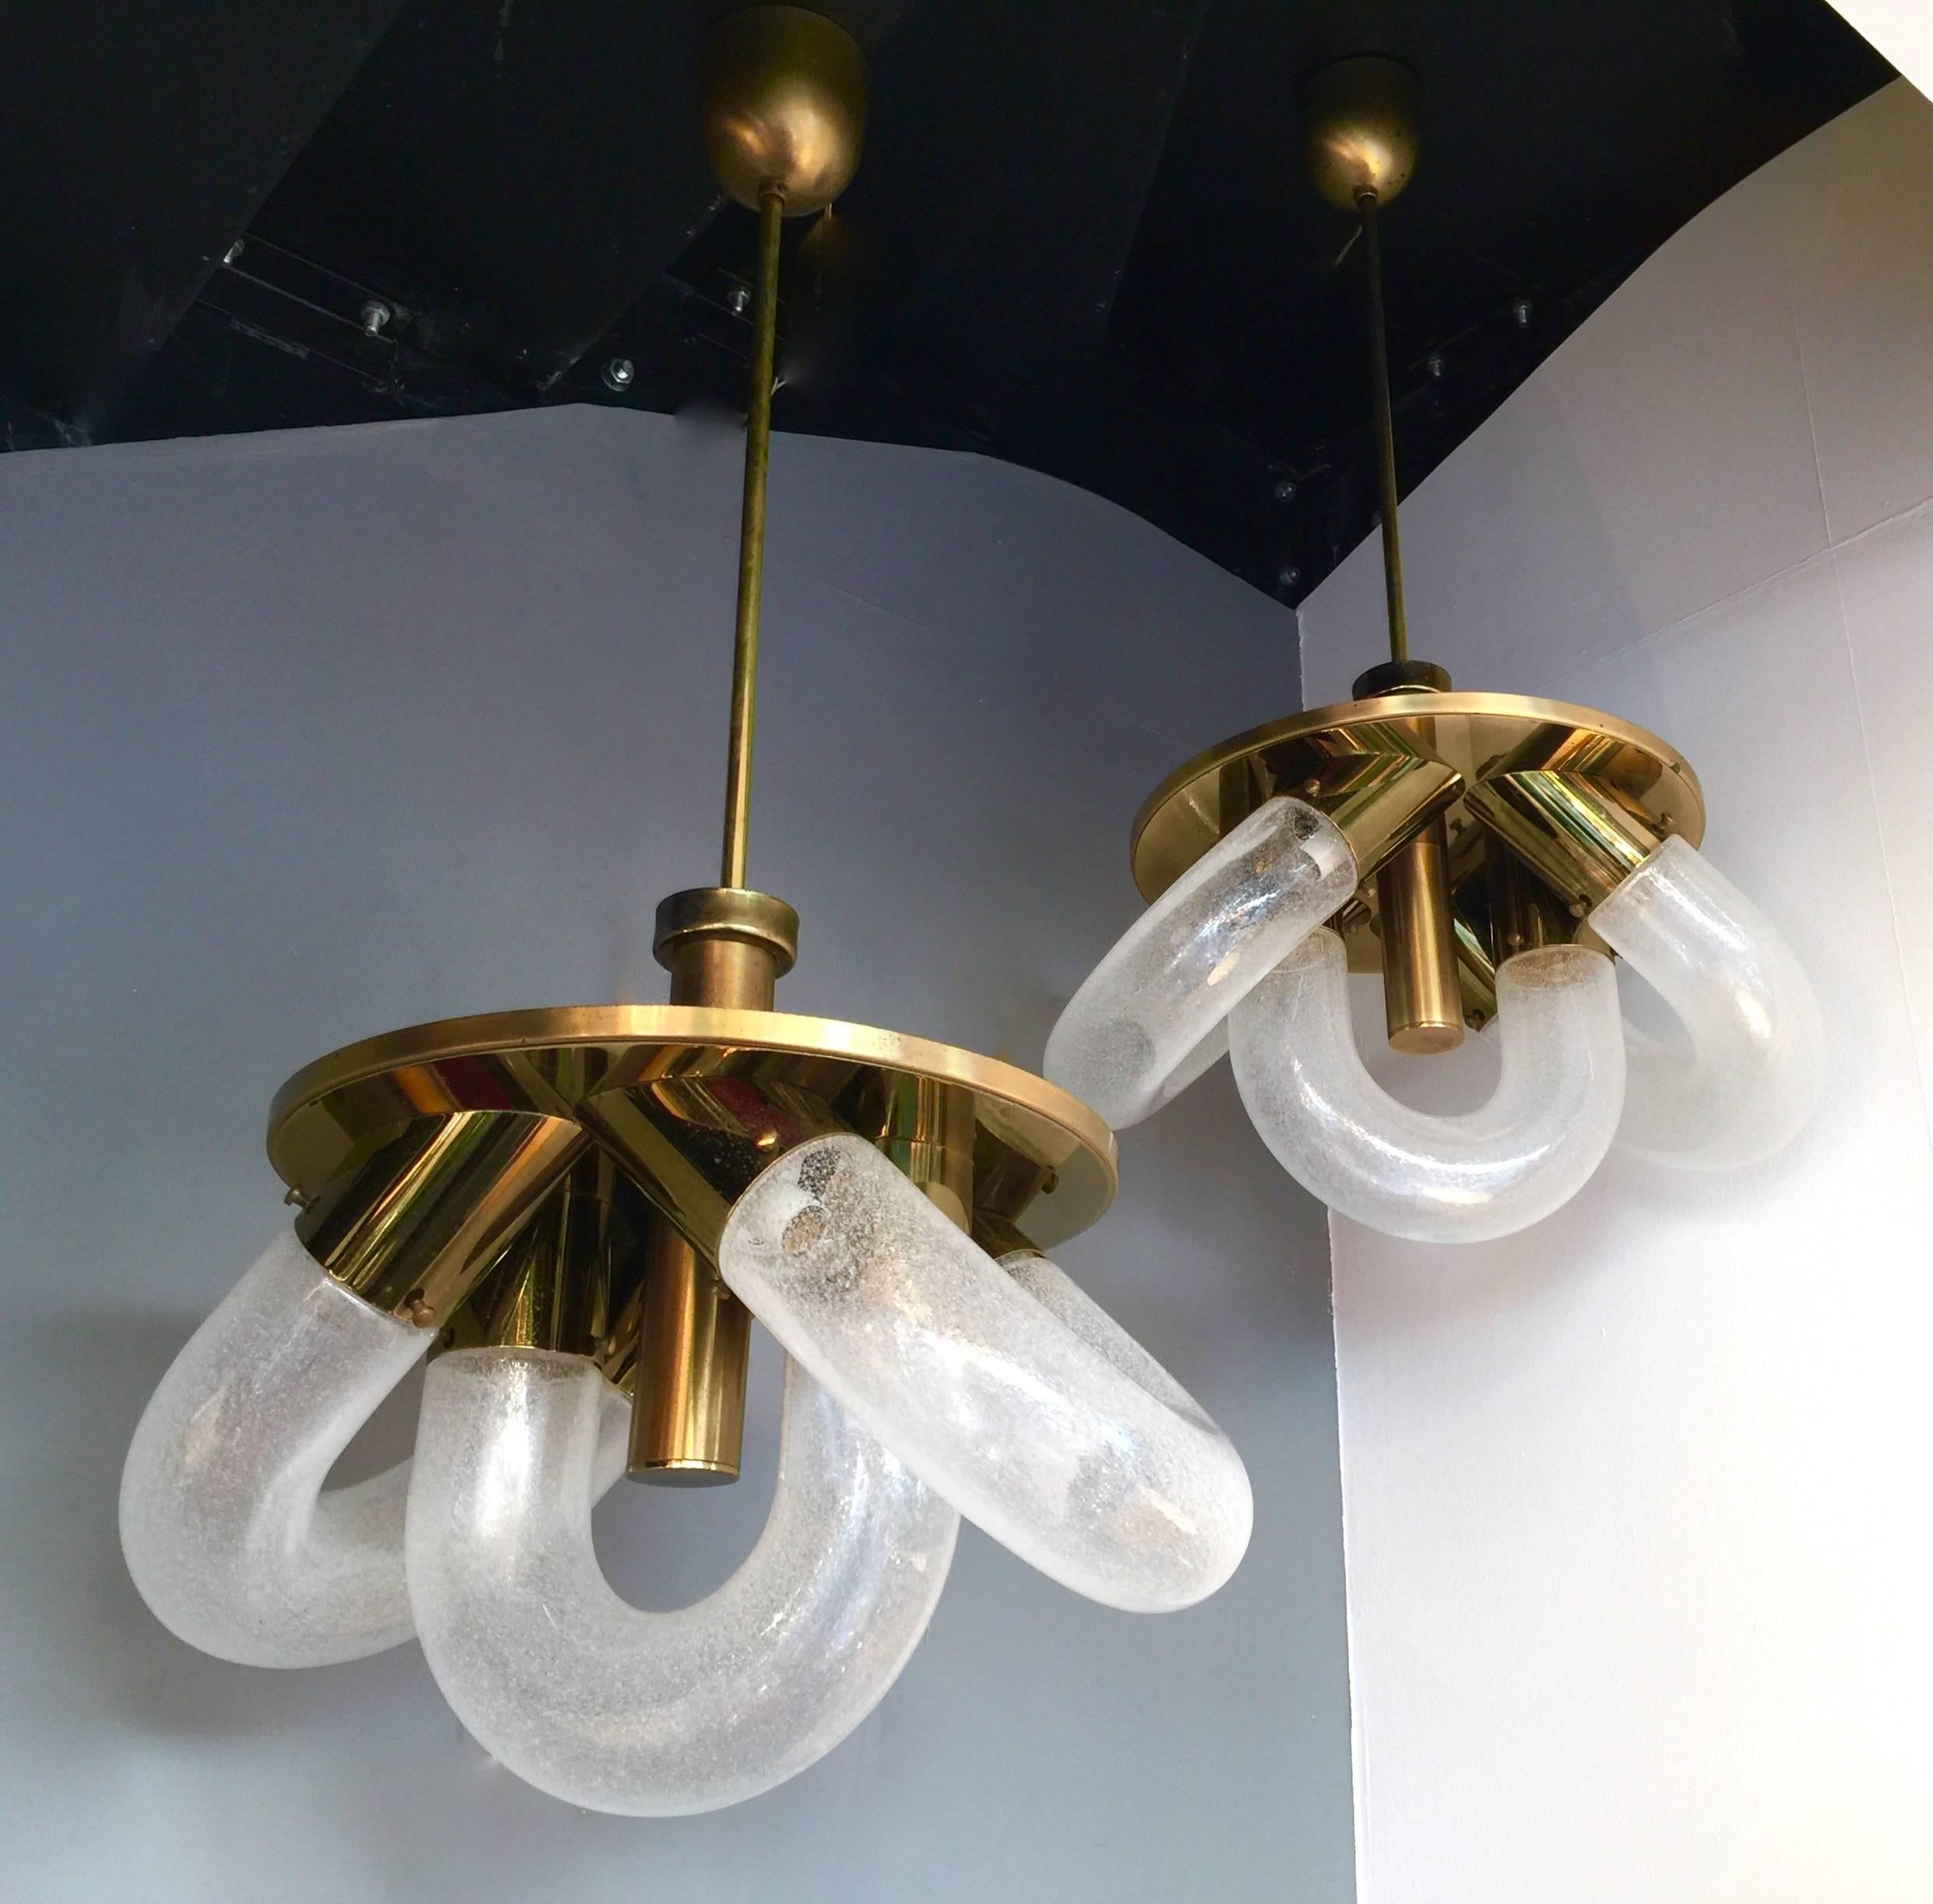 Pair of Chandeliers rare version of a Mid-Century Modern Spage Age ring chandeliers or ceiling pendant light by the designer Carlo Nason for the manufacture Mazzega in Murano blown glass mounted on a rare brass structure. Iconic from the Italian